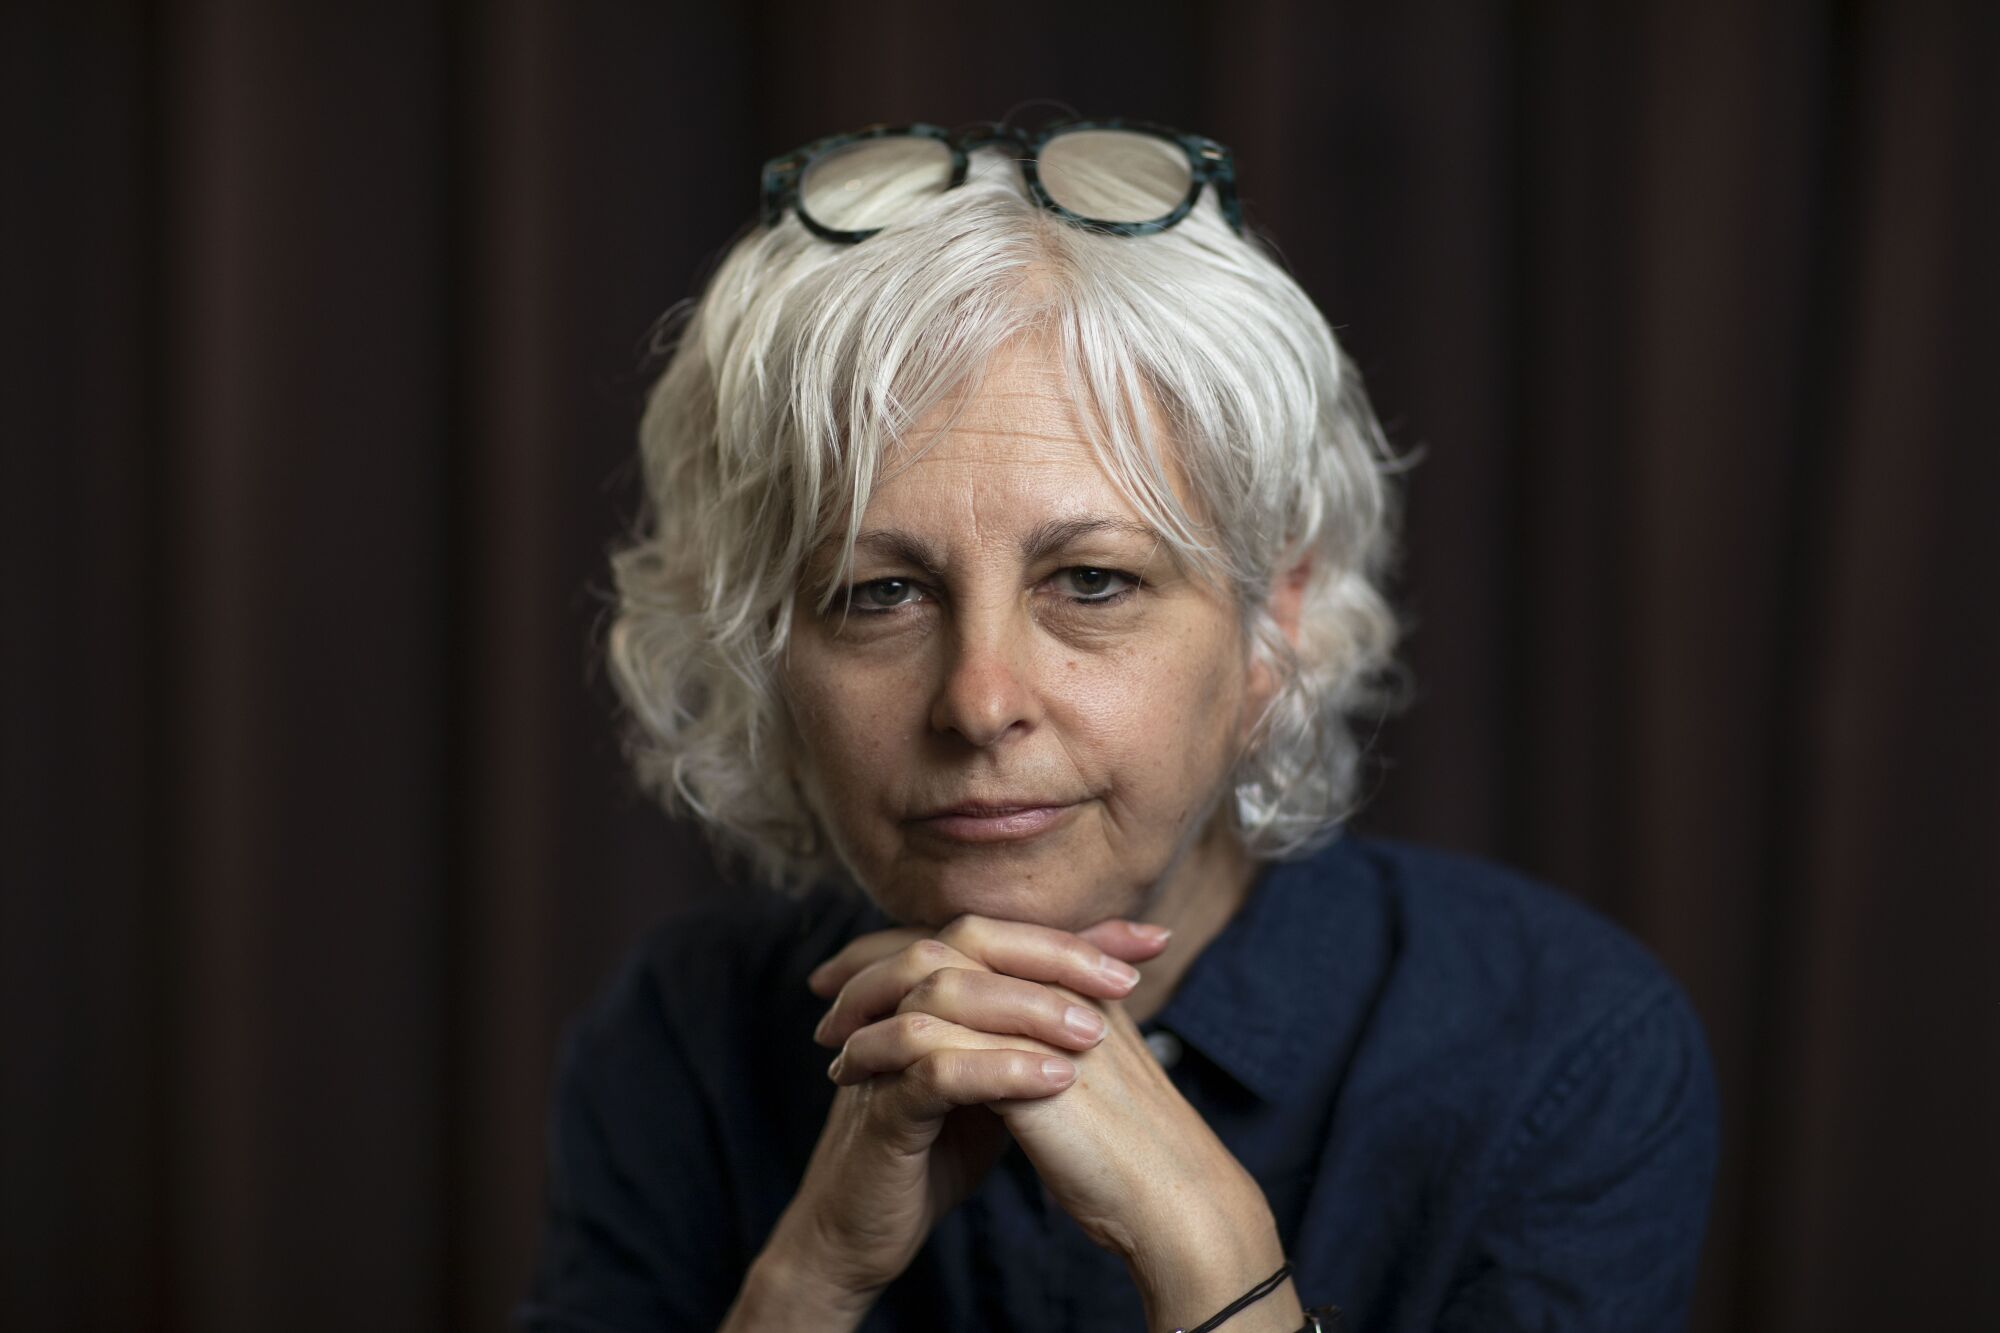 Katie DiCamillo, author of "A Very Mercy Christmas," at the Los Angeles Times Festival of Books Portrait Studio.